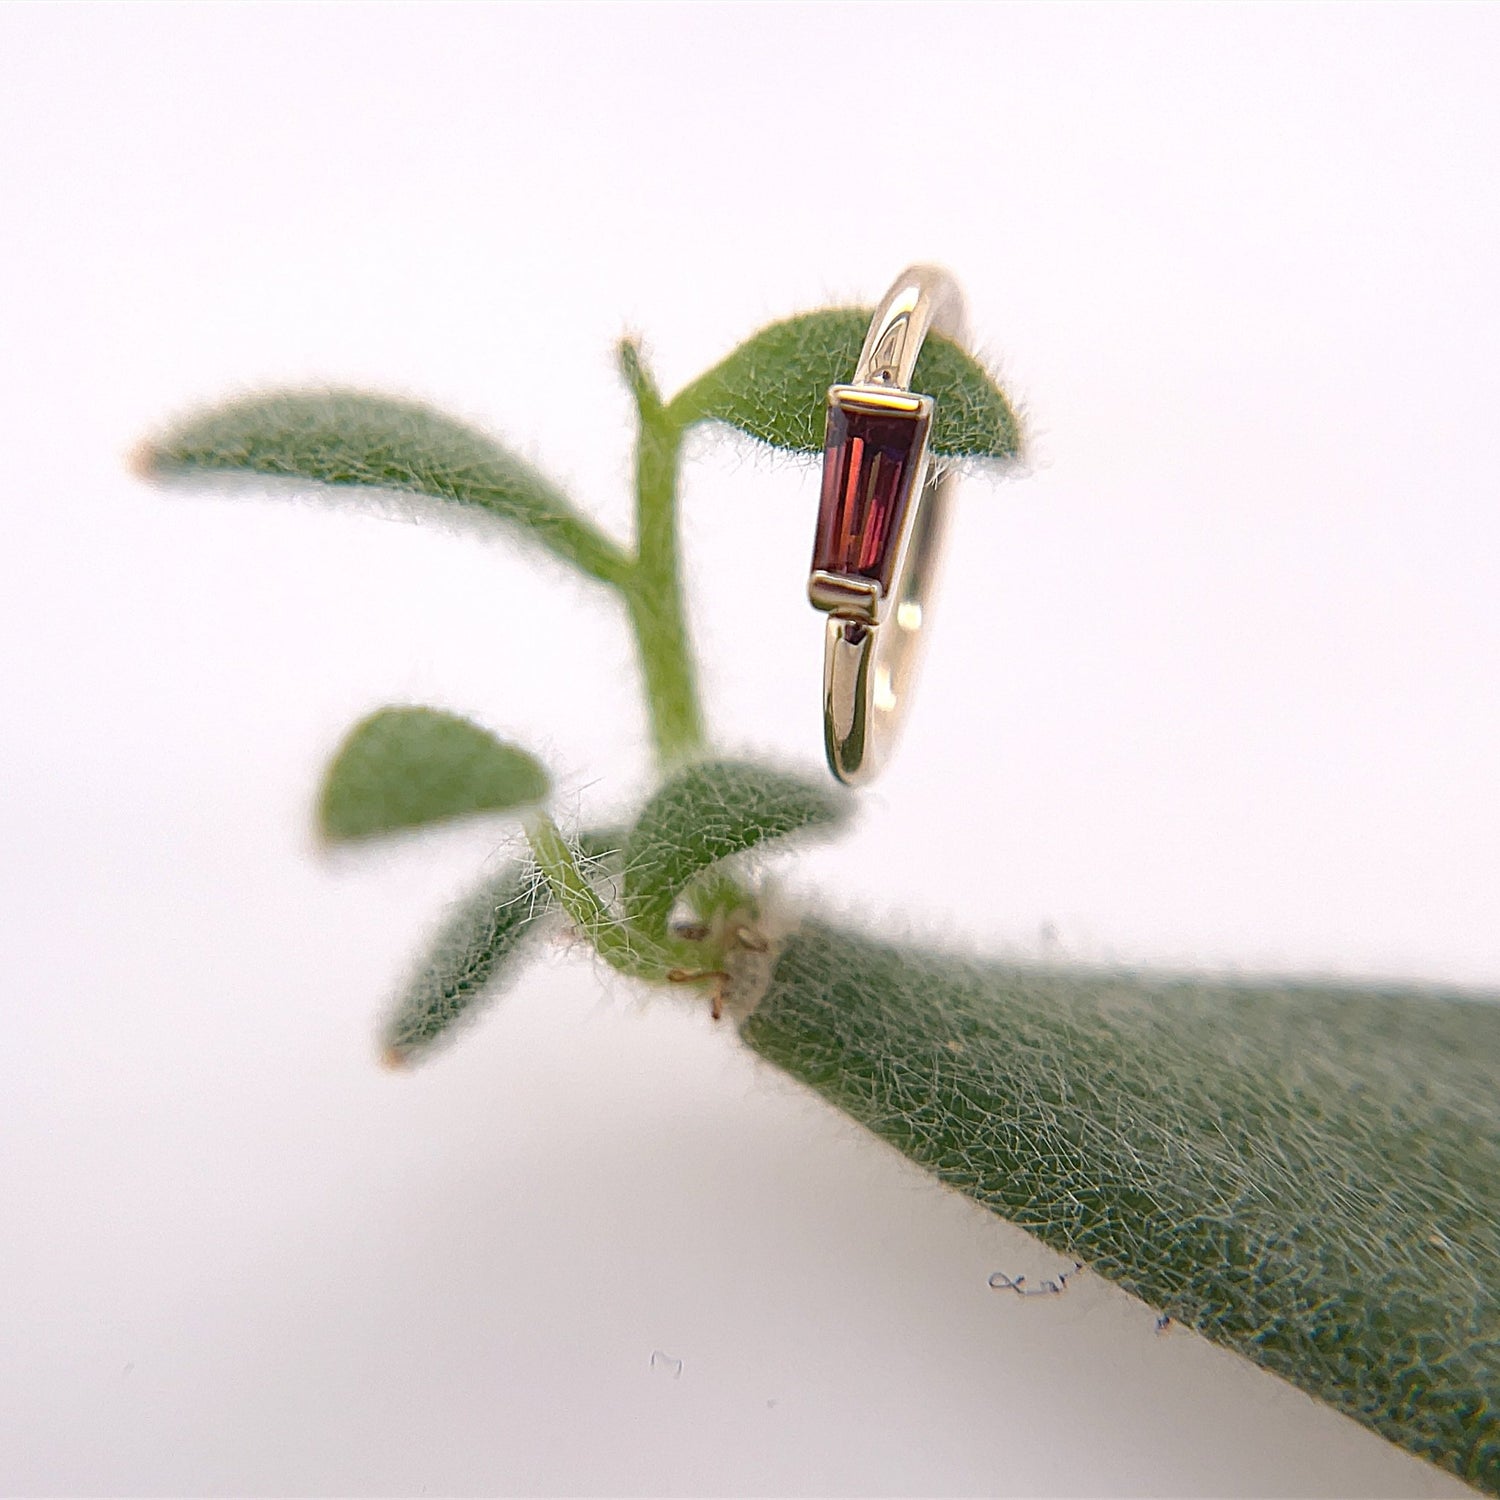 Tapered Baguette Fixed Ring - Agave in Bloom